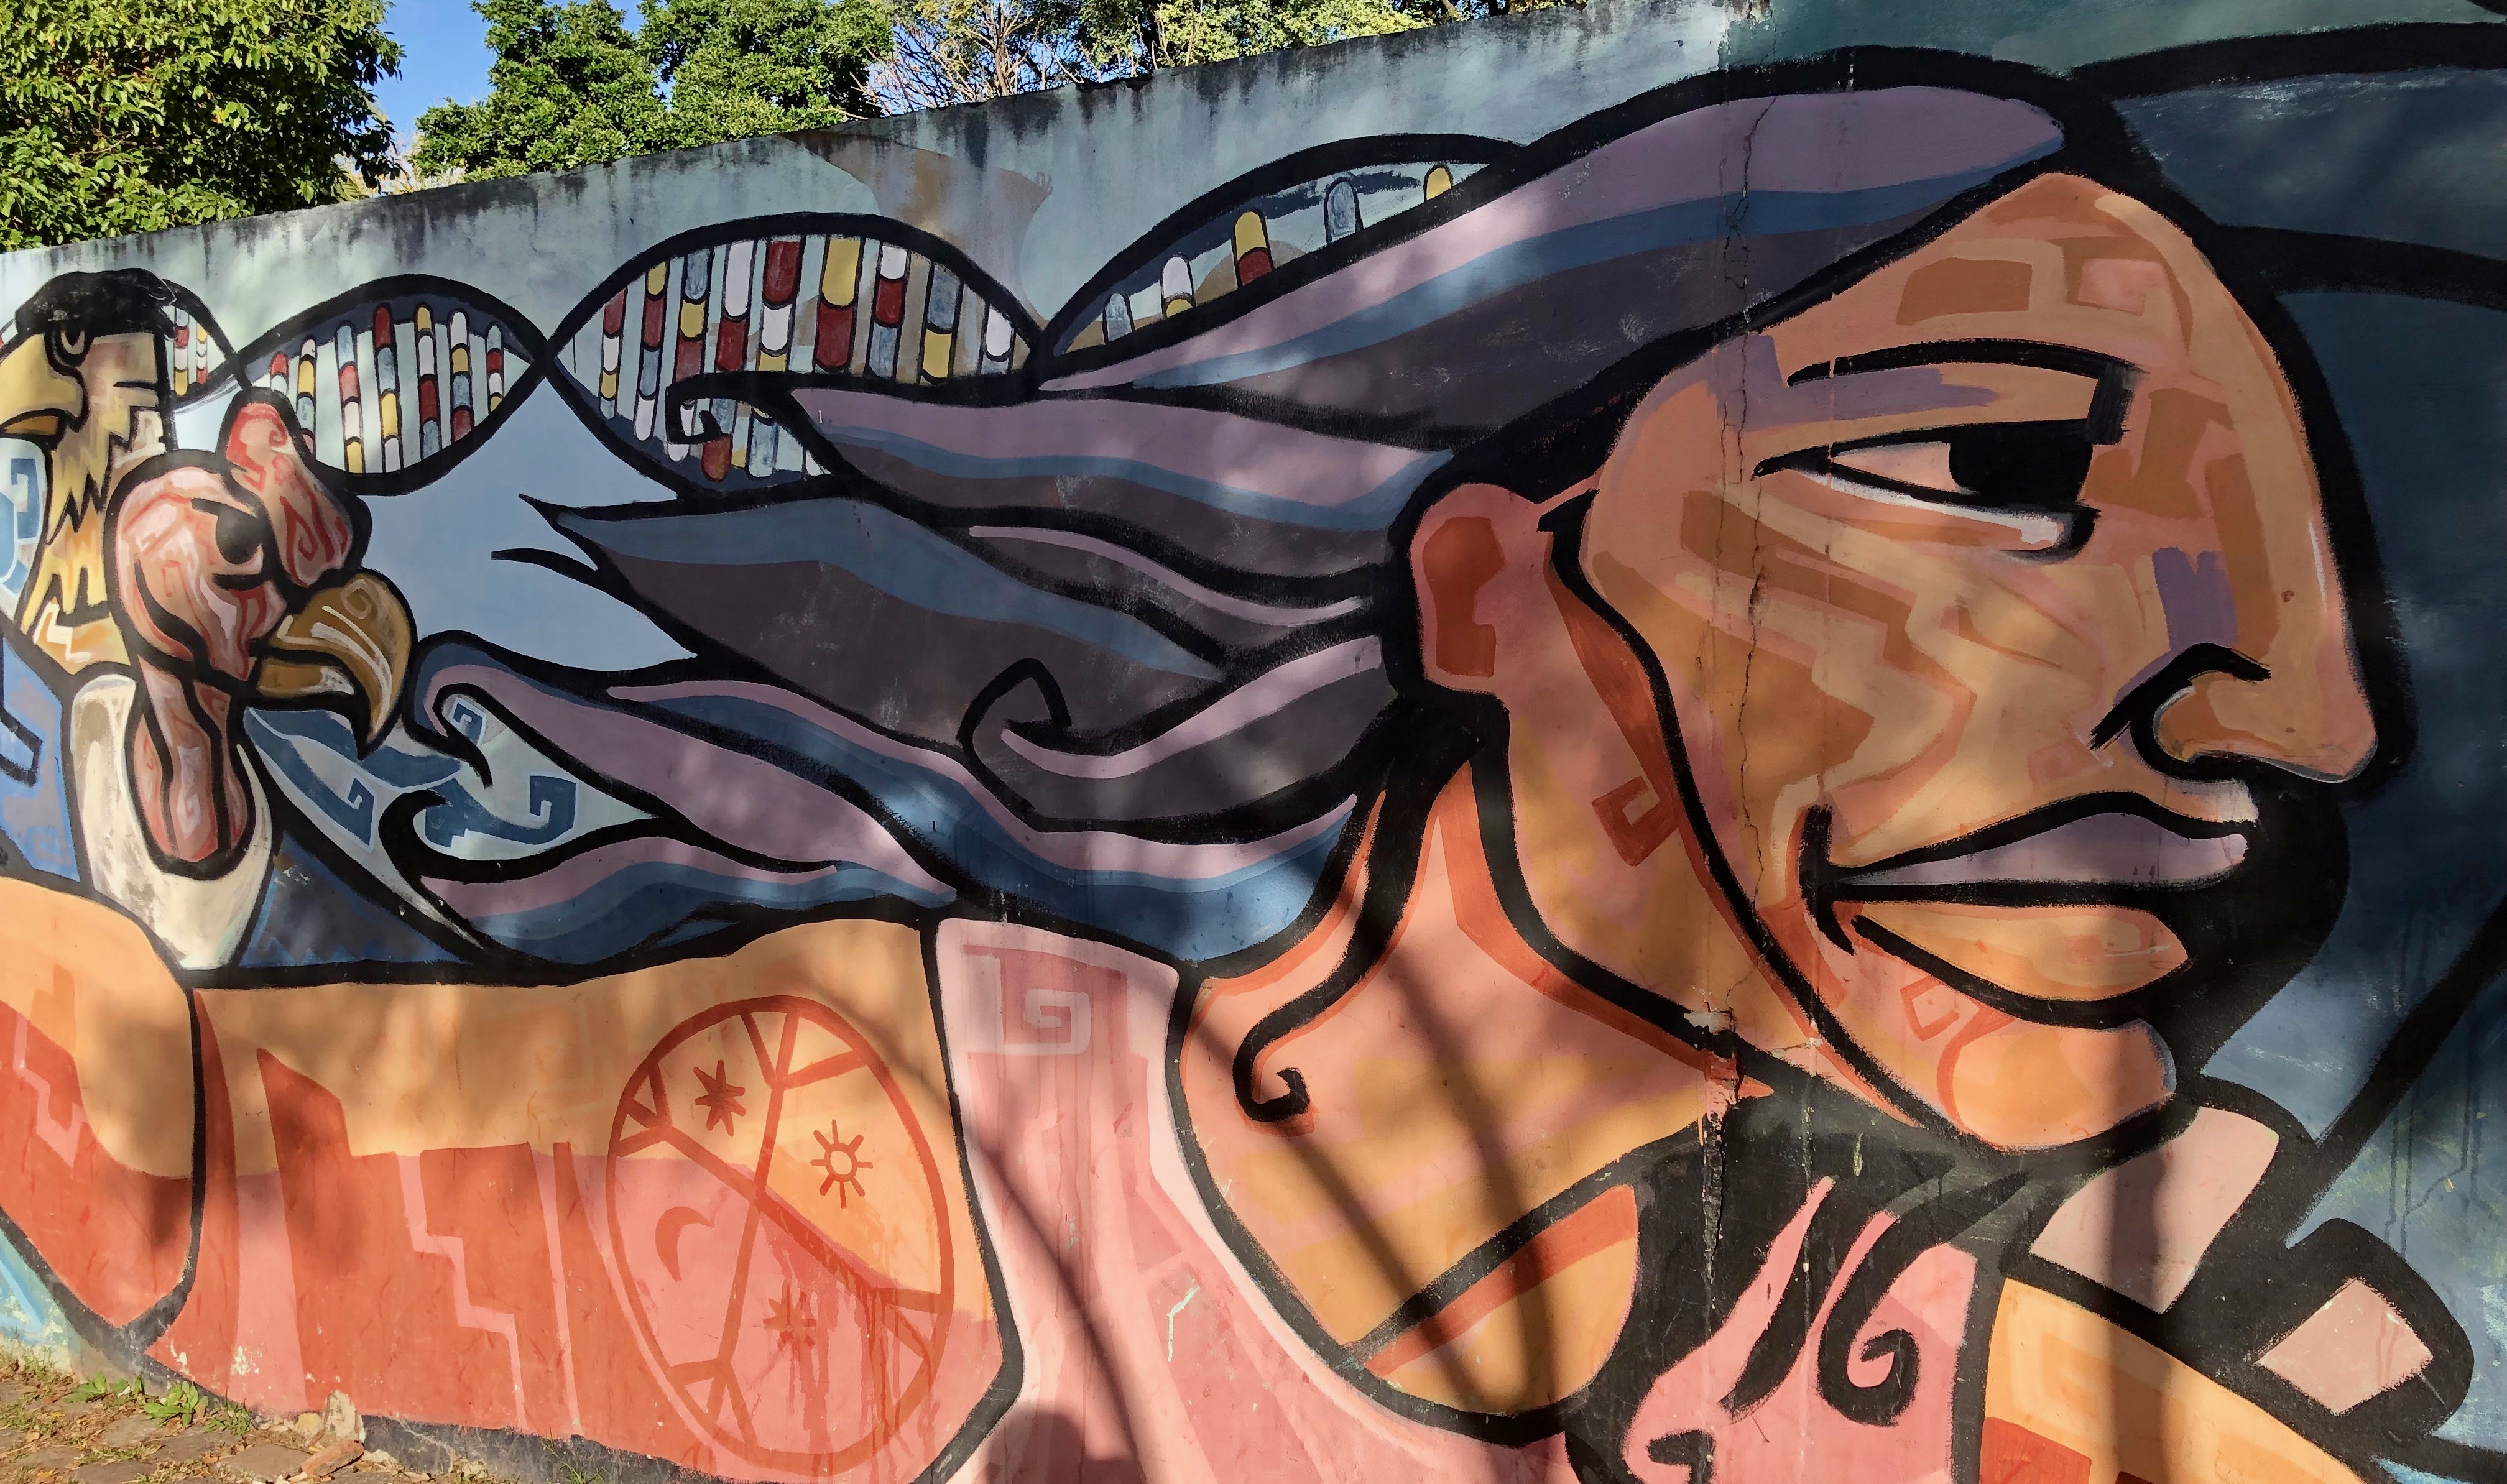 A mural in Buenos Aires with DNA double Helix showing nucleotide pairs, native animals and people